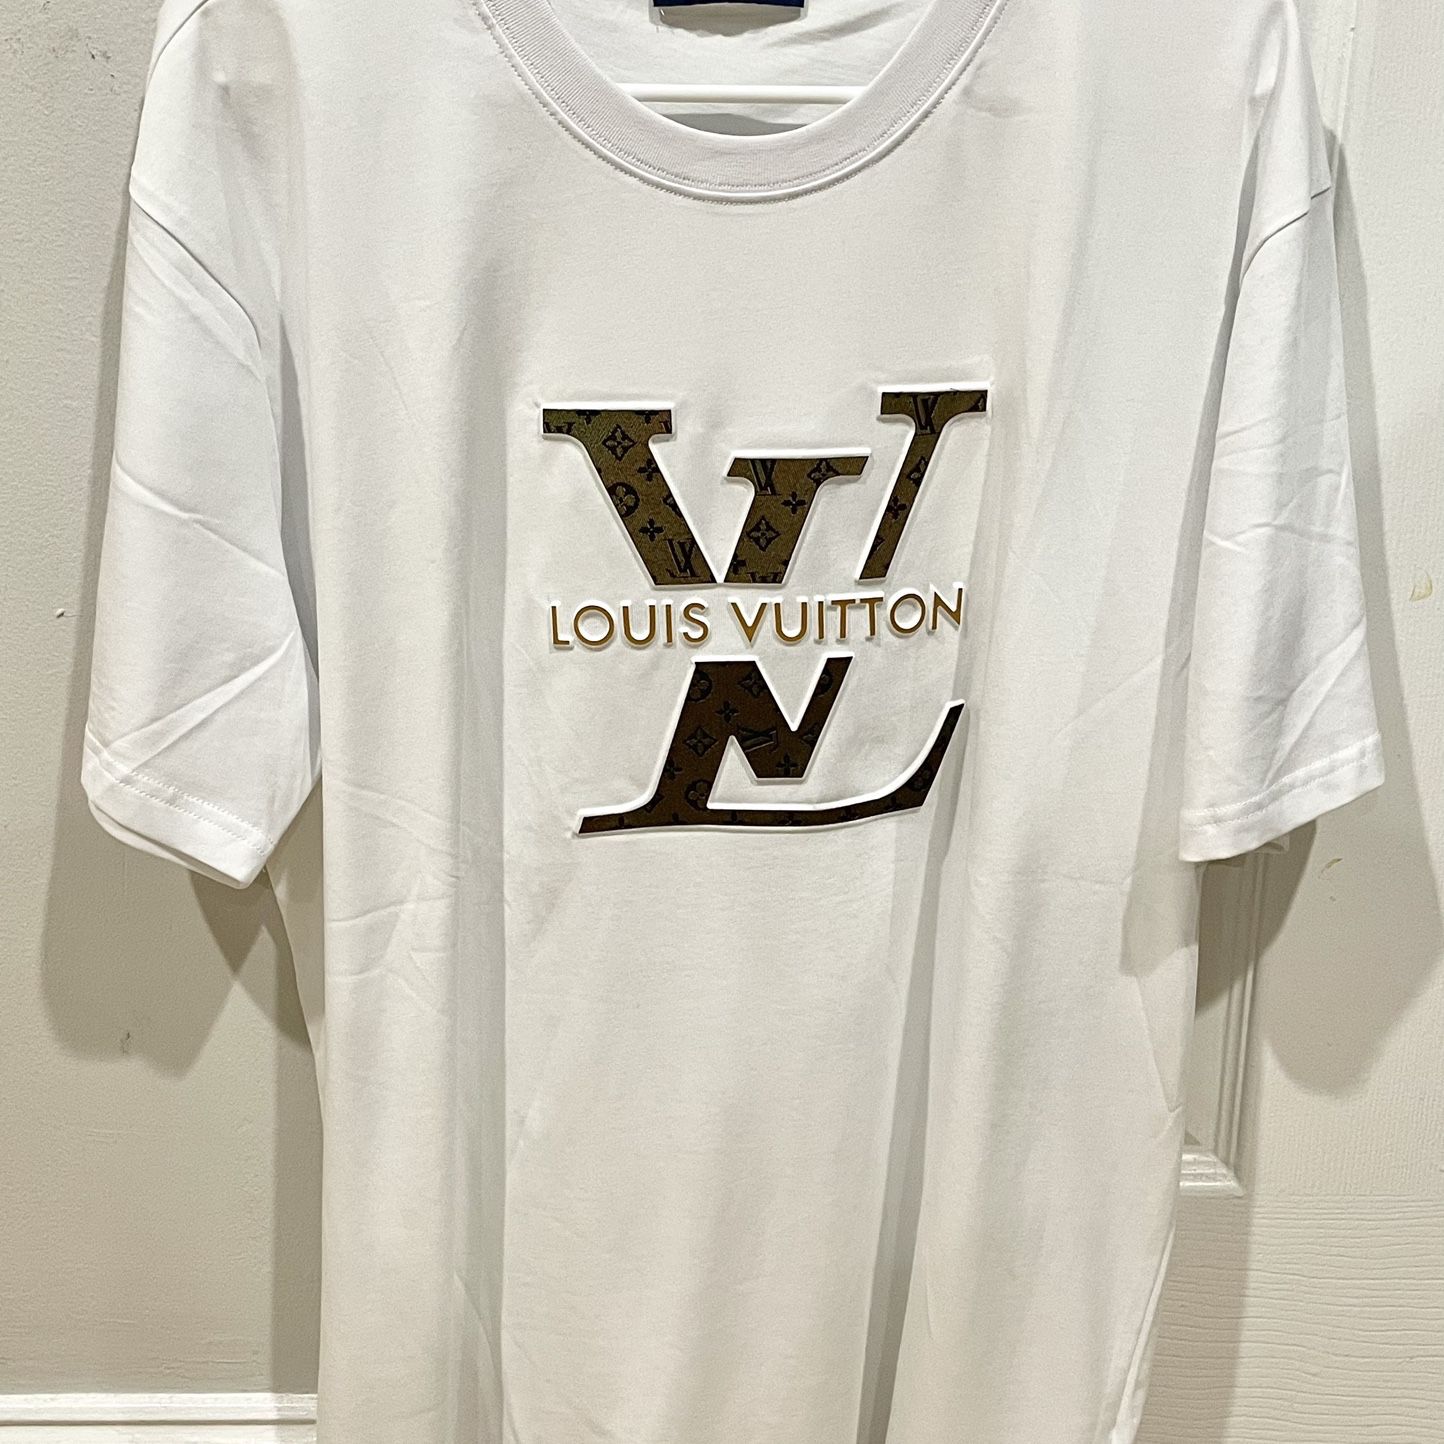 Men's Louis Vuitton T-Shirt Size XL for Sale in The Bronx, New York -  OfferUp